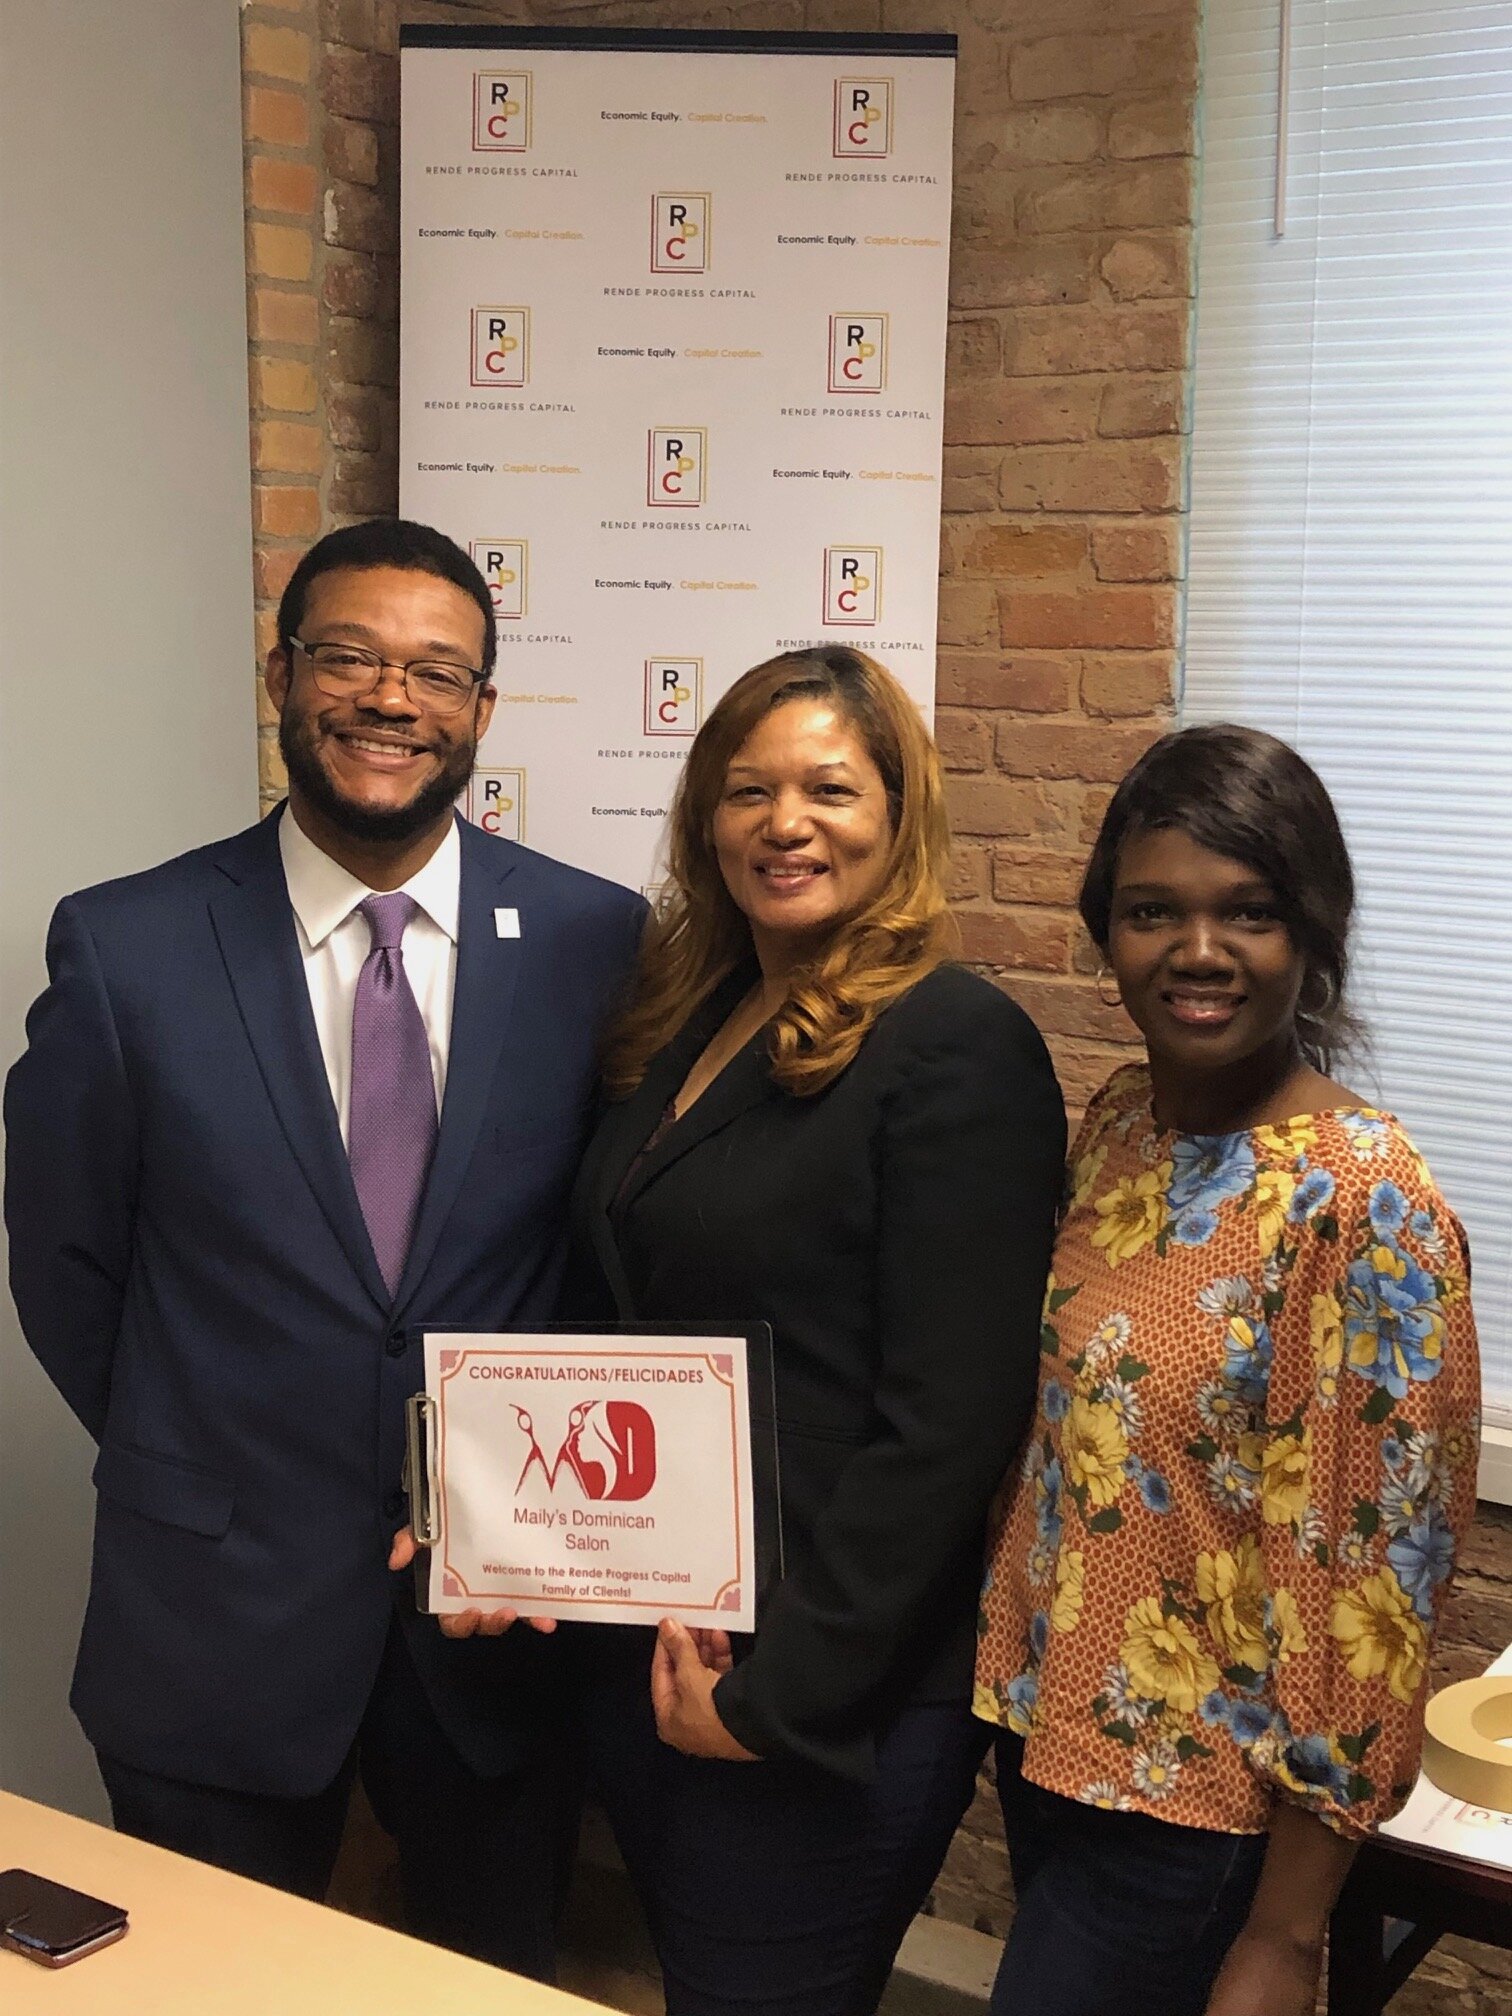 (From left to right): Eric Foster, Managing Director for Rende Progress Capital; Clara Guevara, Owner of Maily's Dominican Salon; and Ana Jose, Program Manager for the West Michigan Hispanic Chamber of Commerce